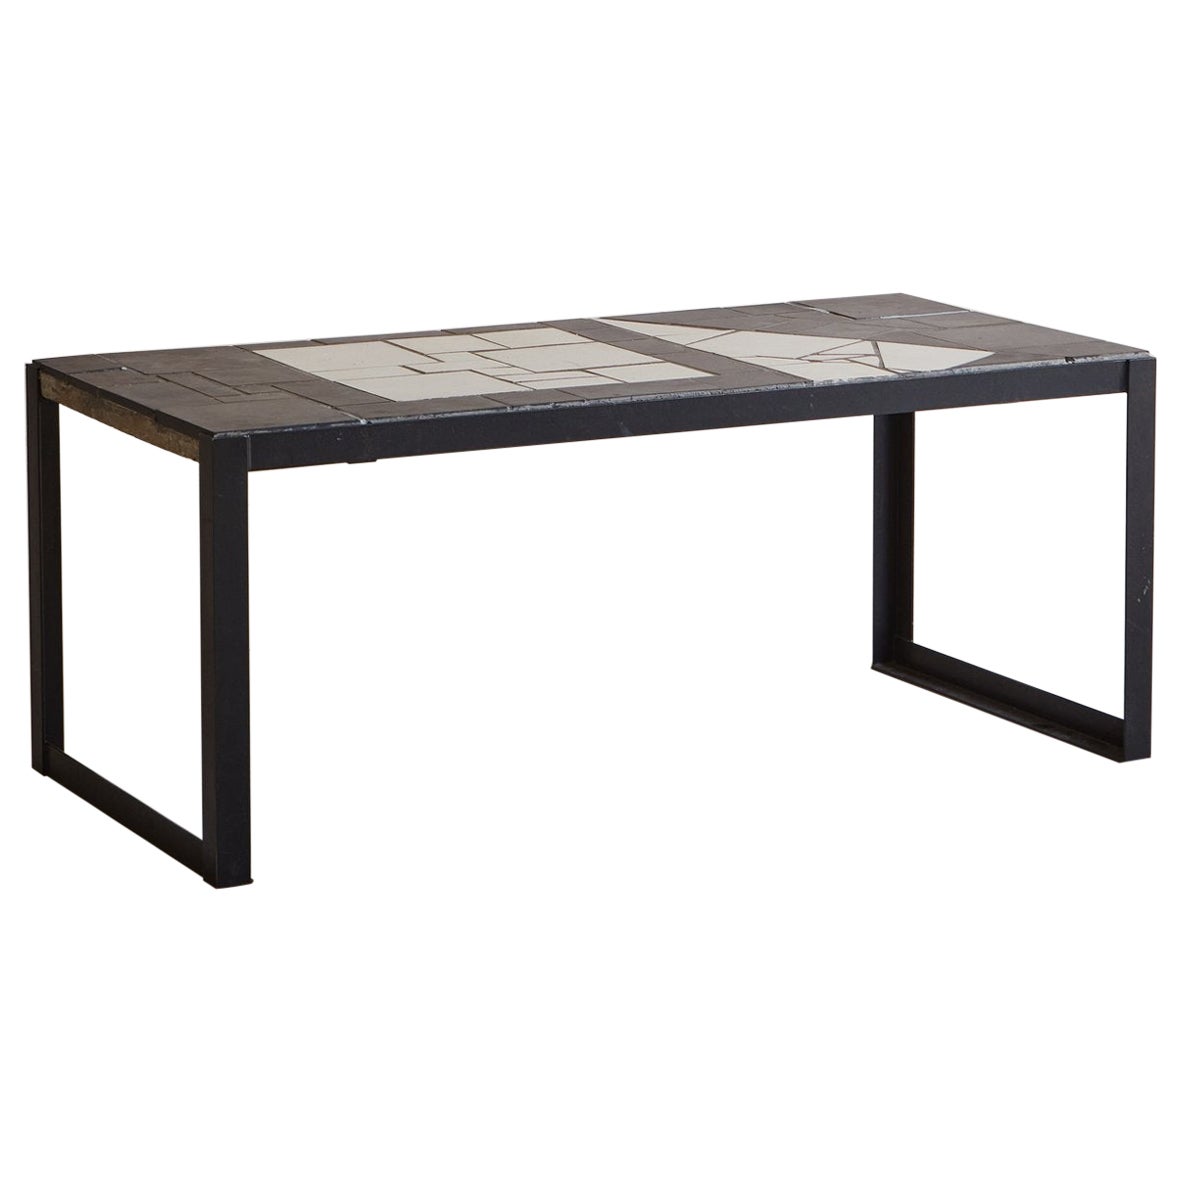 Black + White Tile Coffee Table with Metal Base, Switzerland 20th Century